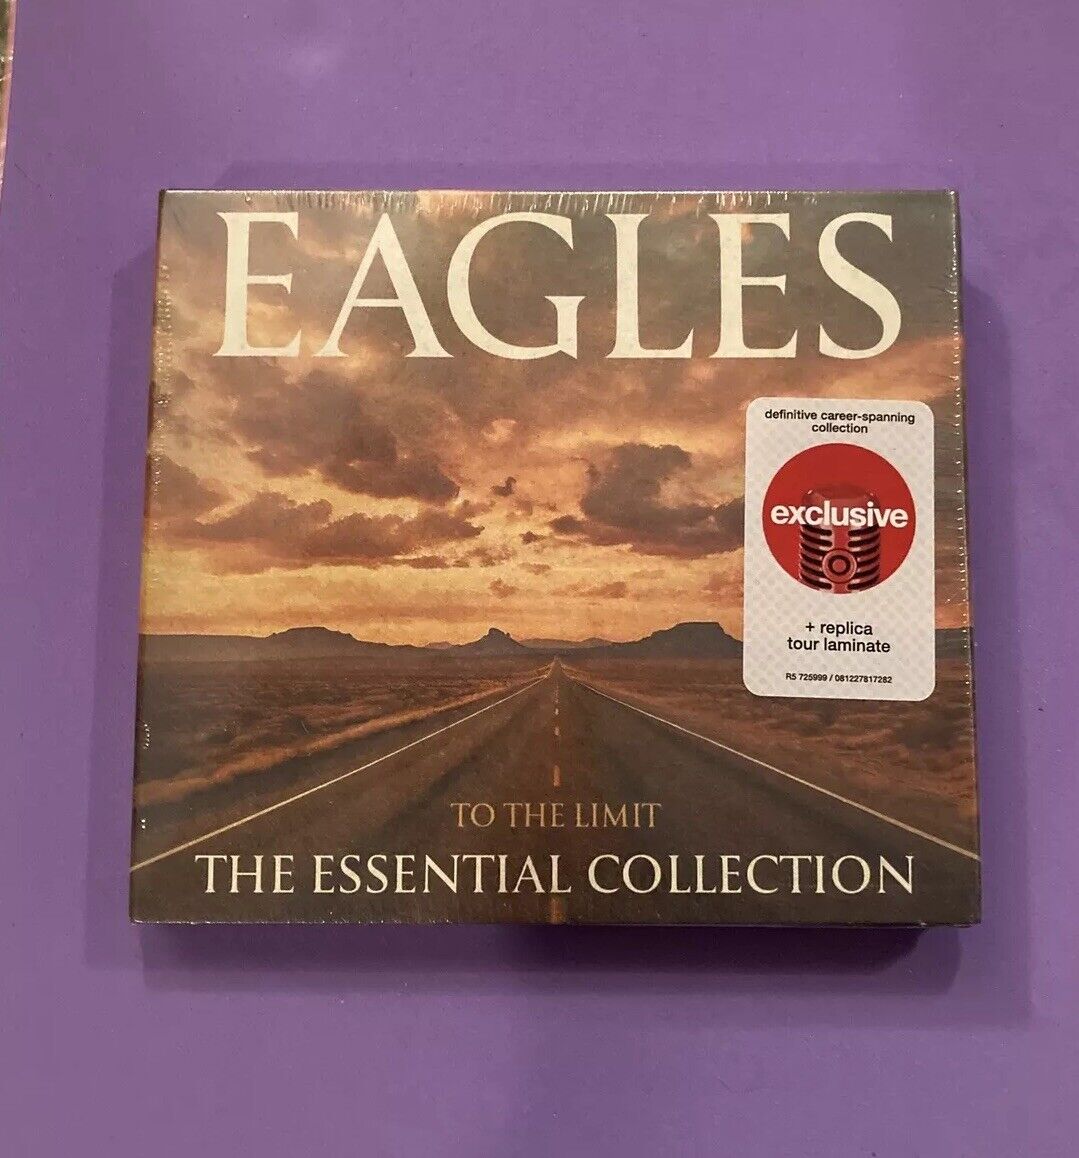 NEW The Eagles To the Limit: The Essential Collection 3 CD SET Target Exclusive